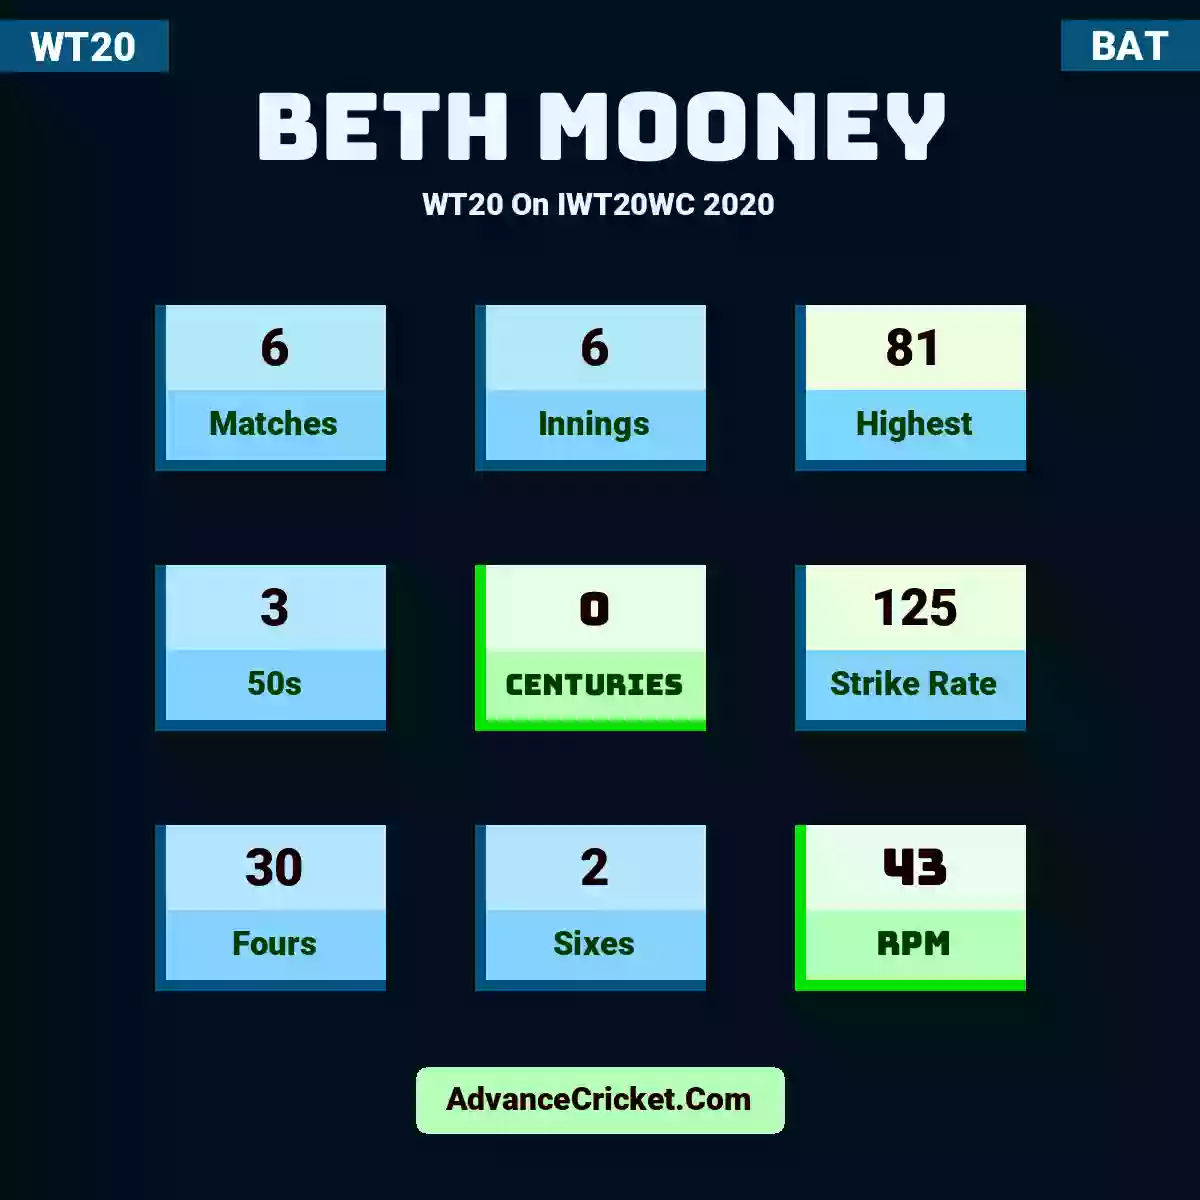 Beth Mooney WT20  On IWT20WC 2020, Beth Mooney played 6 matches, scored 81 runs as highest, 3 half-centuries, and 0 centuries, with a strike rate of 125. B.Mooney hit 30 fours and 2 sixes, with an RPM of 43.